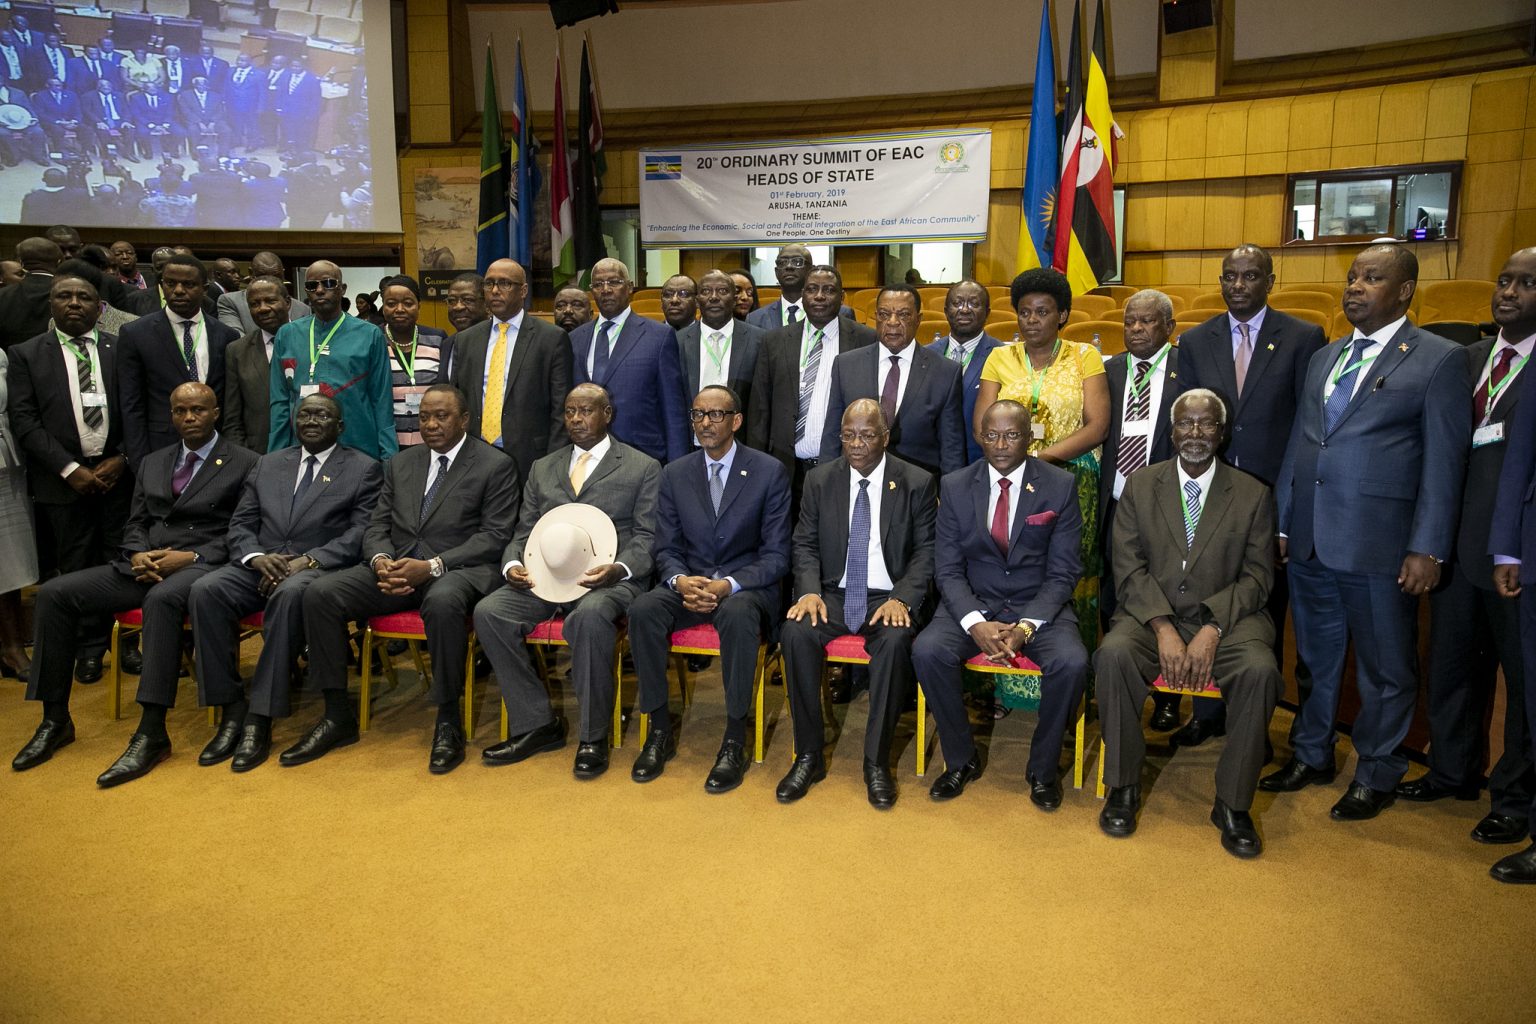 EAC Heads of State meeting together in Arusha - The Exchange